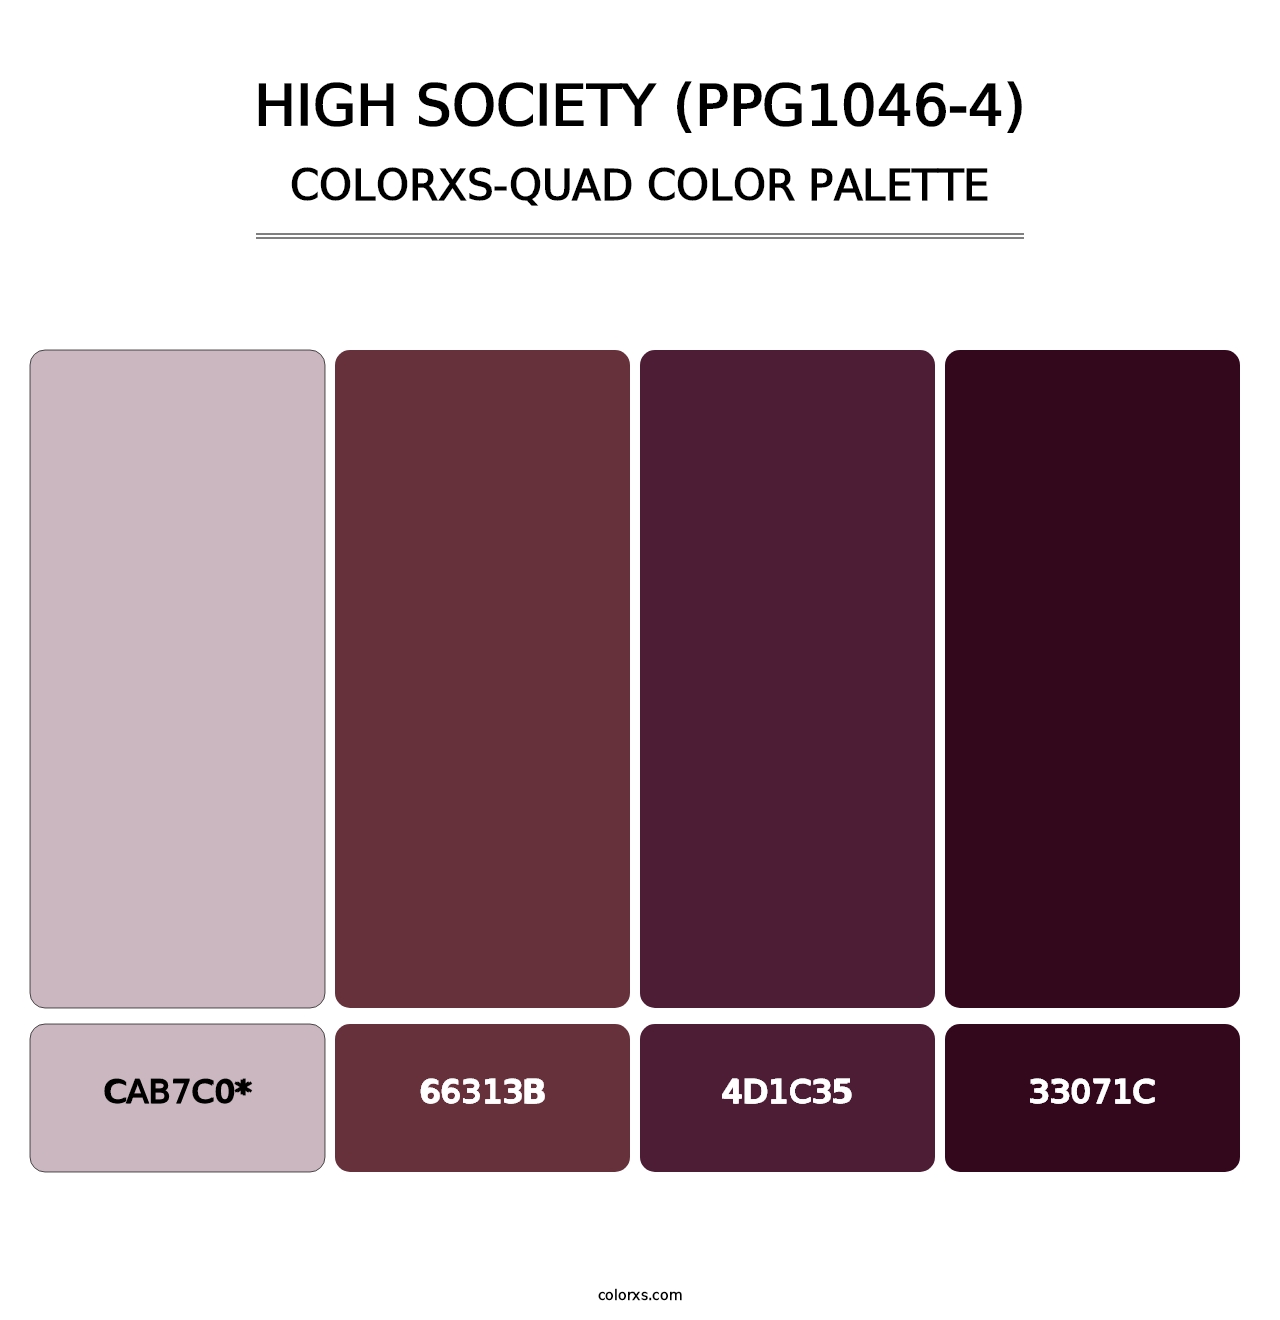 High Society (PPG1046-4) - Colorxs Quad Palette